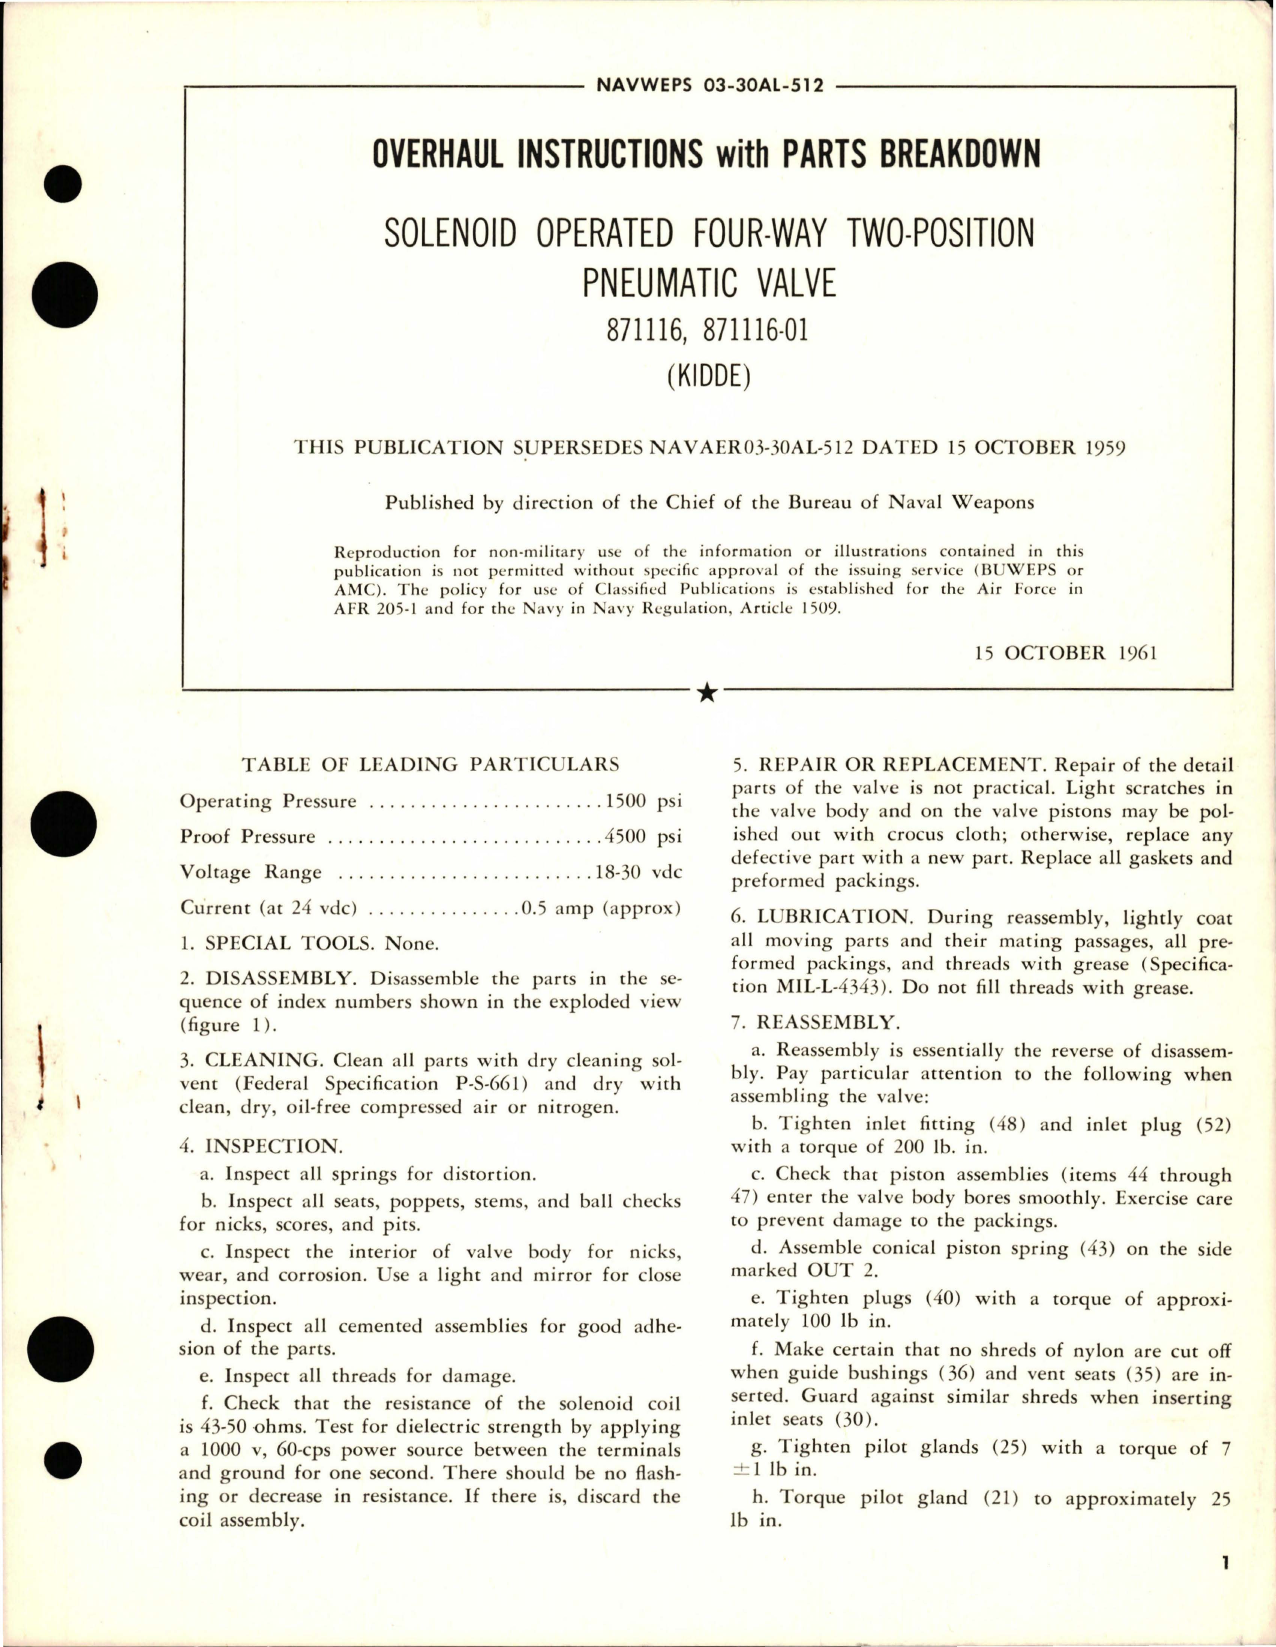 Sample page 1 from AirCorps Library document: Overhaul Instructions with Parts Breakdown for Solenoid Operated Four-Way Two-Position Pneumatic Valve - 871116 and 871116-01